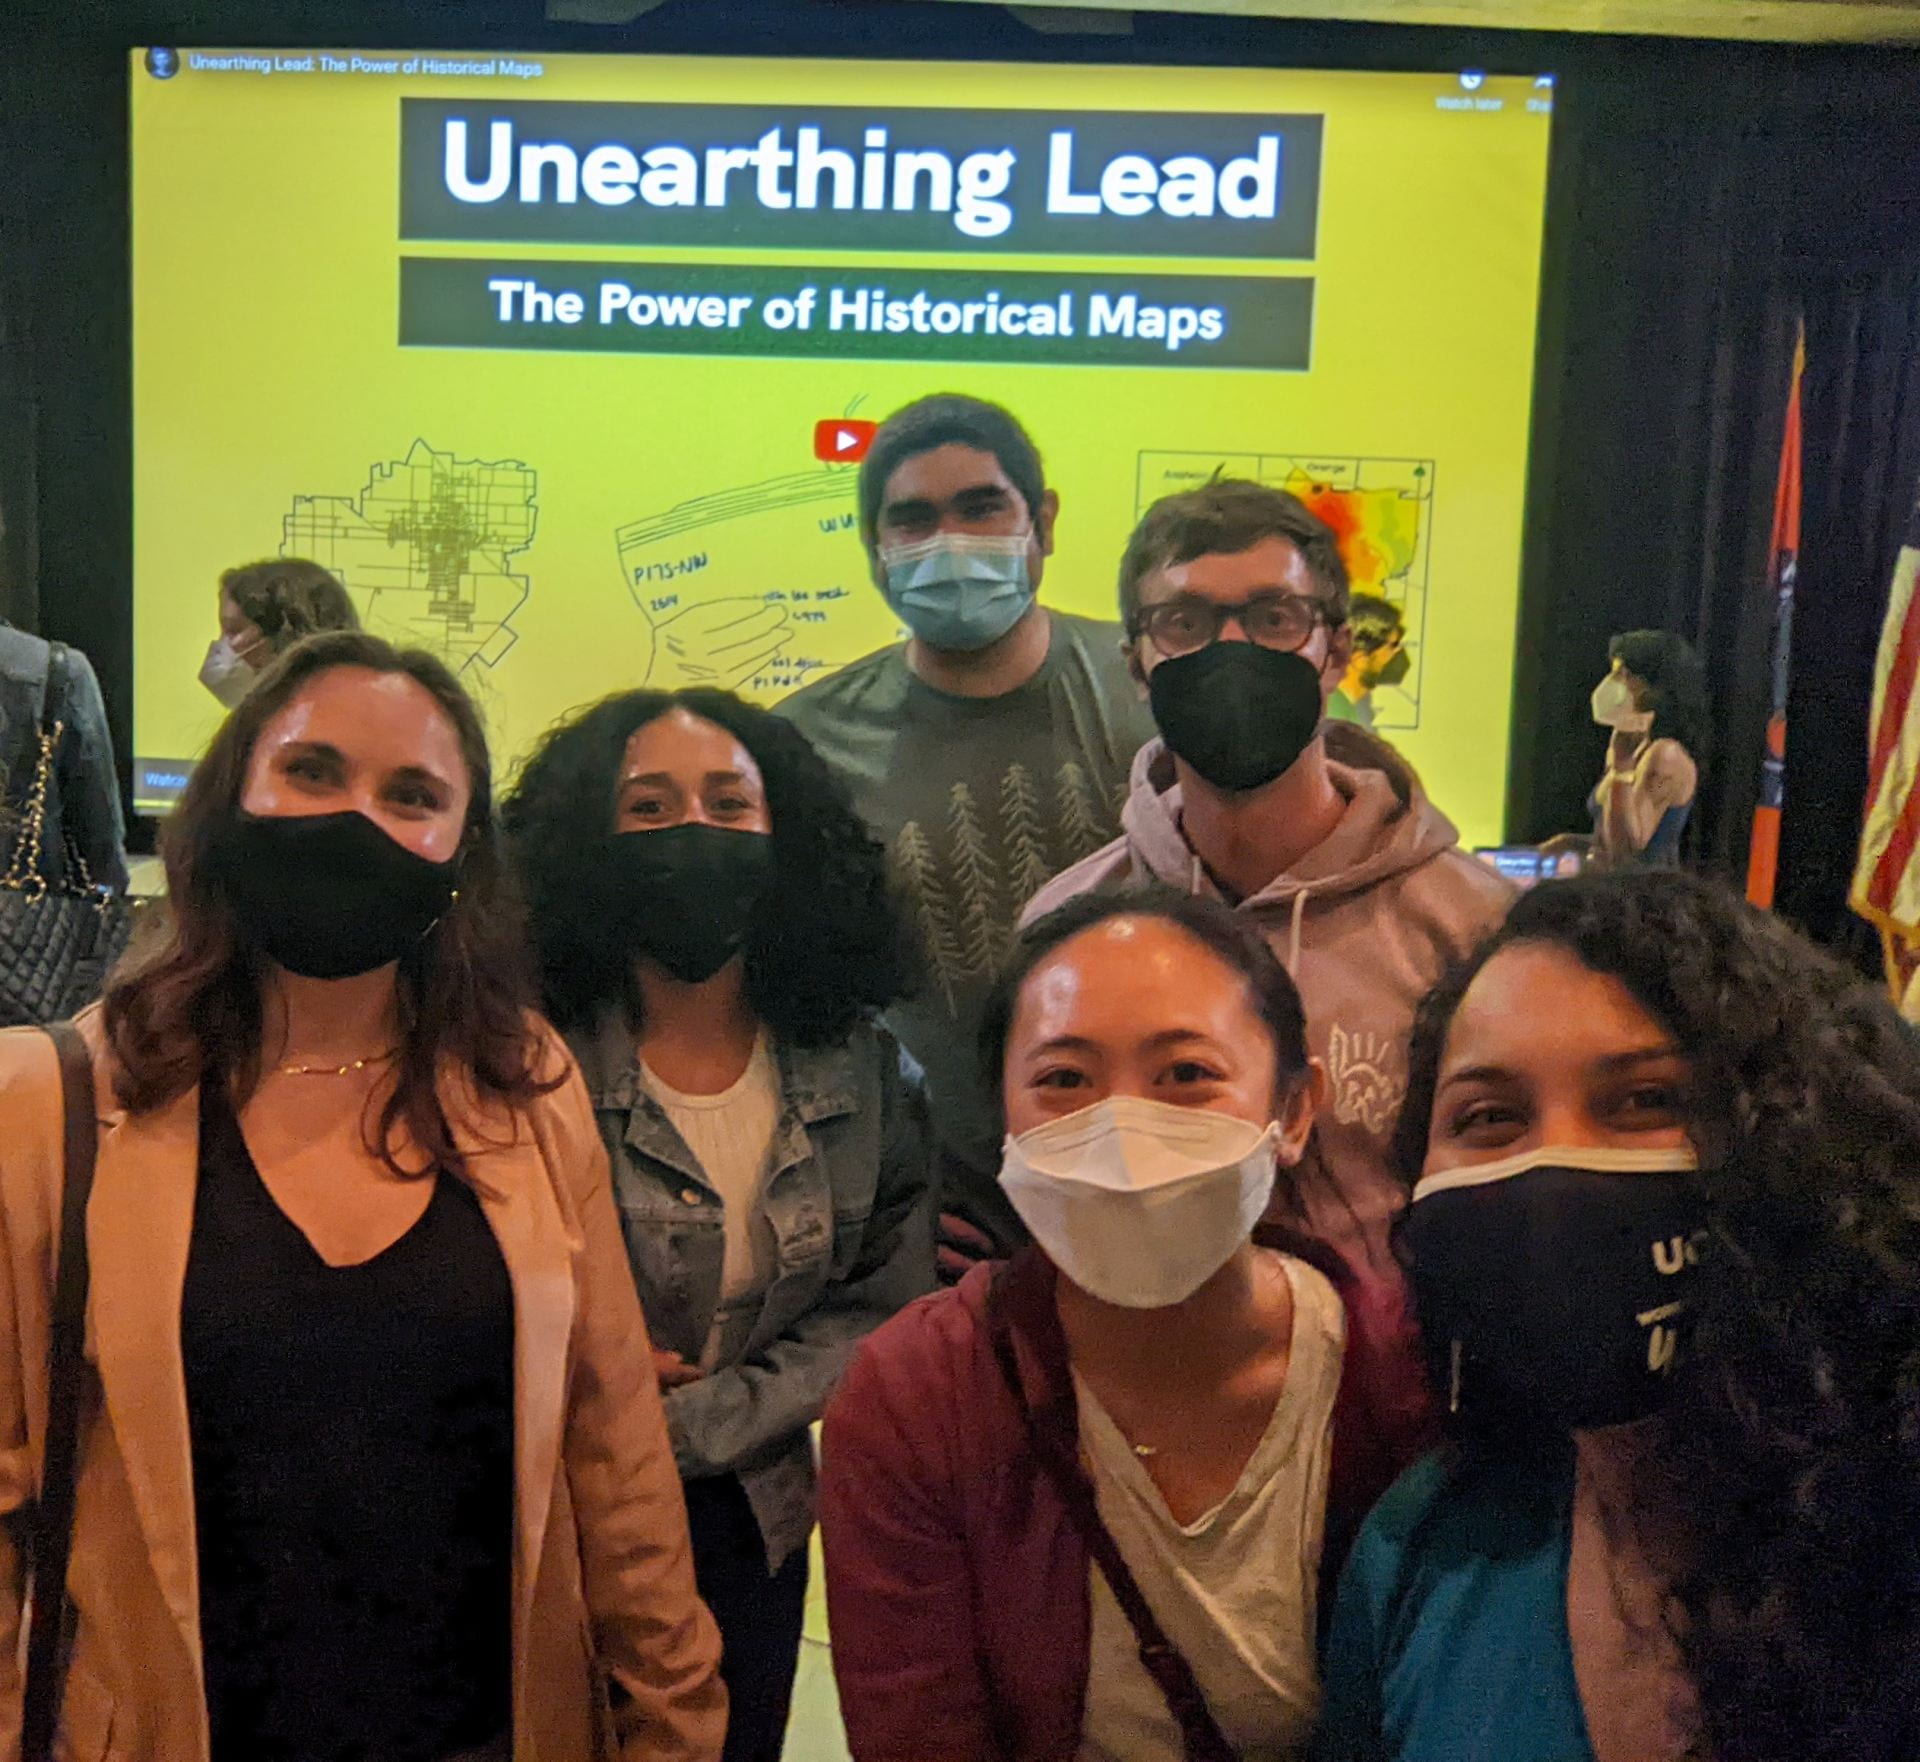 The UCI cross-disciplinary graduate student team won first place in Phase 1 of the EPA’s Environmental Justice Video Challenge for Students, in which they revealed the lead soil contamination threat in Santa Ana. (From left: Annika Hjelmstad, Ashley Green, David Bañuelas, Tim Schütz, Ariane Jong, and Alexis Guerra.)